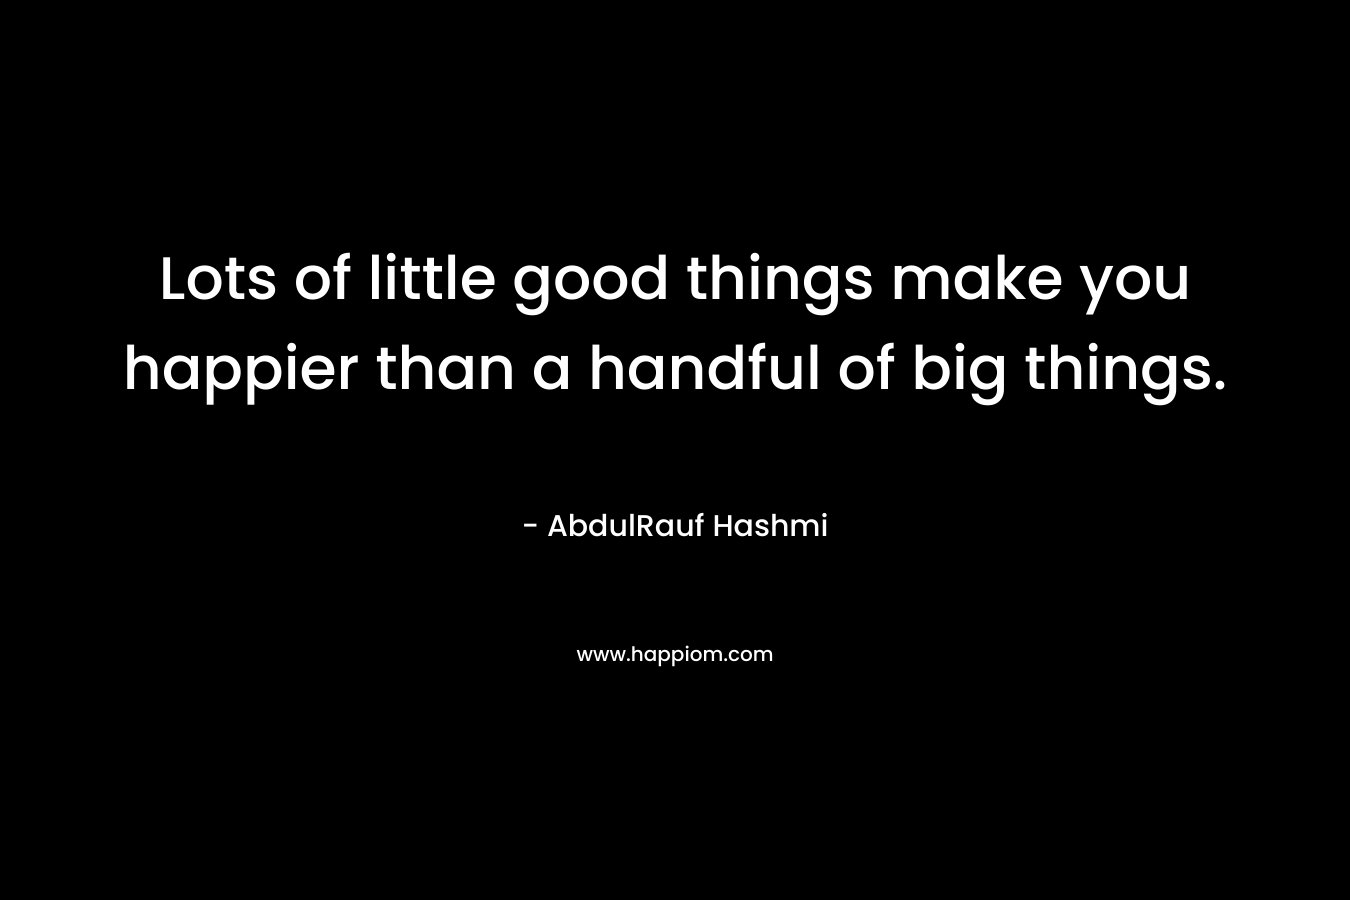 Lots of little good things make you happier than a handful of big things.